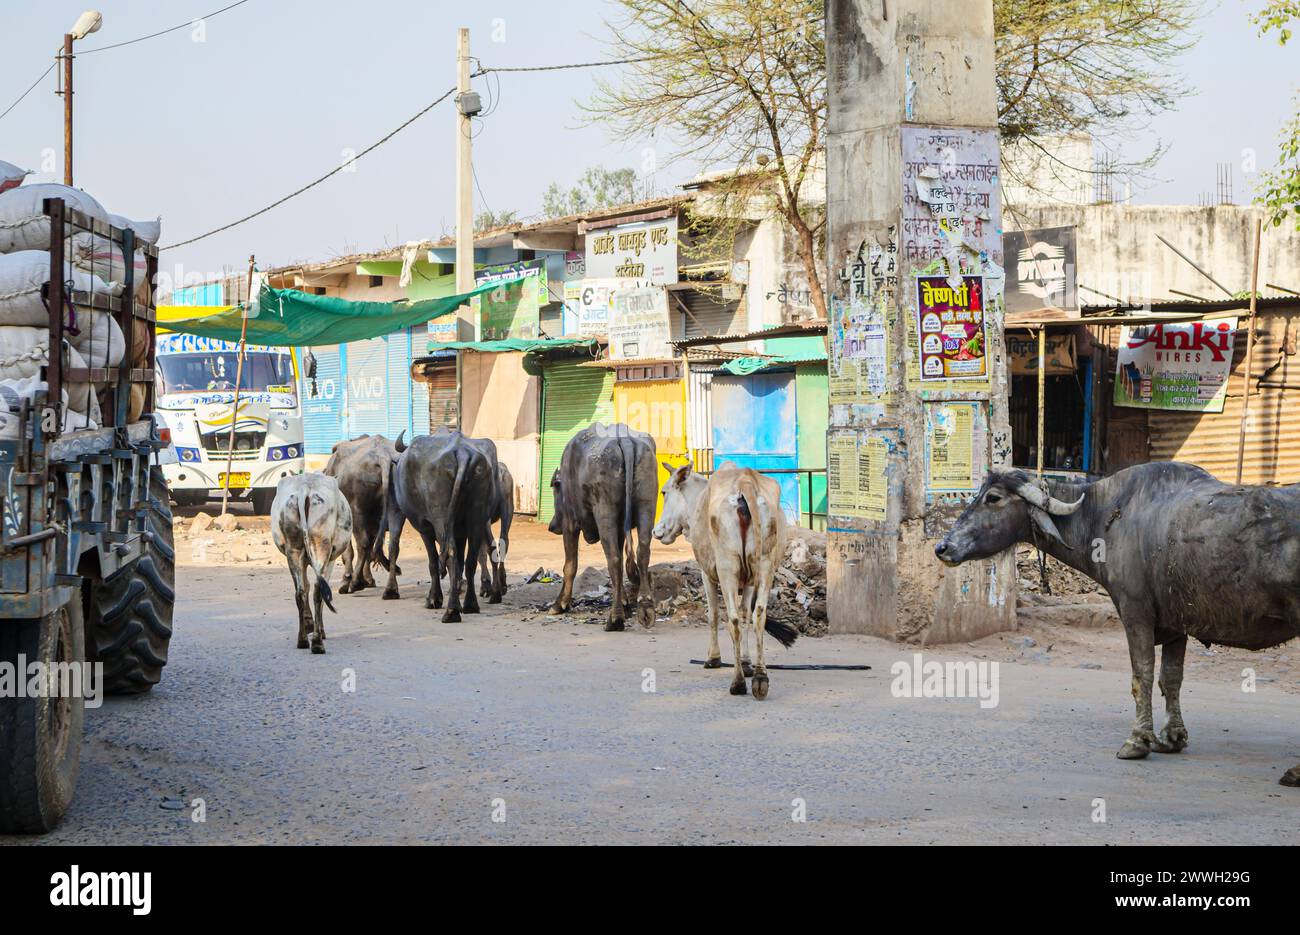 Typical street scene: cows walking in a dusty road beside closed roadside shops in a town near Bandhavgarh, Umaria district of Madhya Pradesh, India Stock Photo